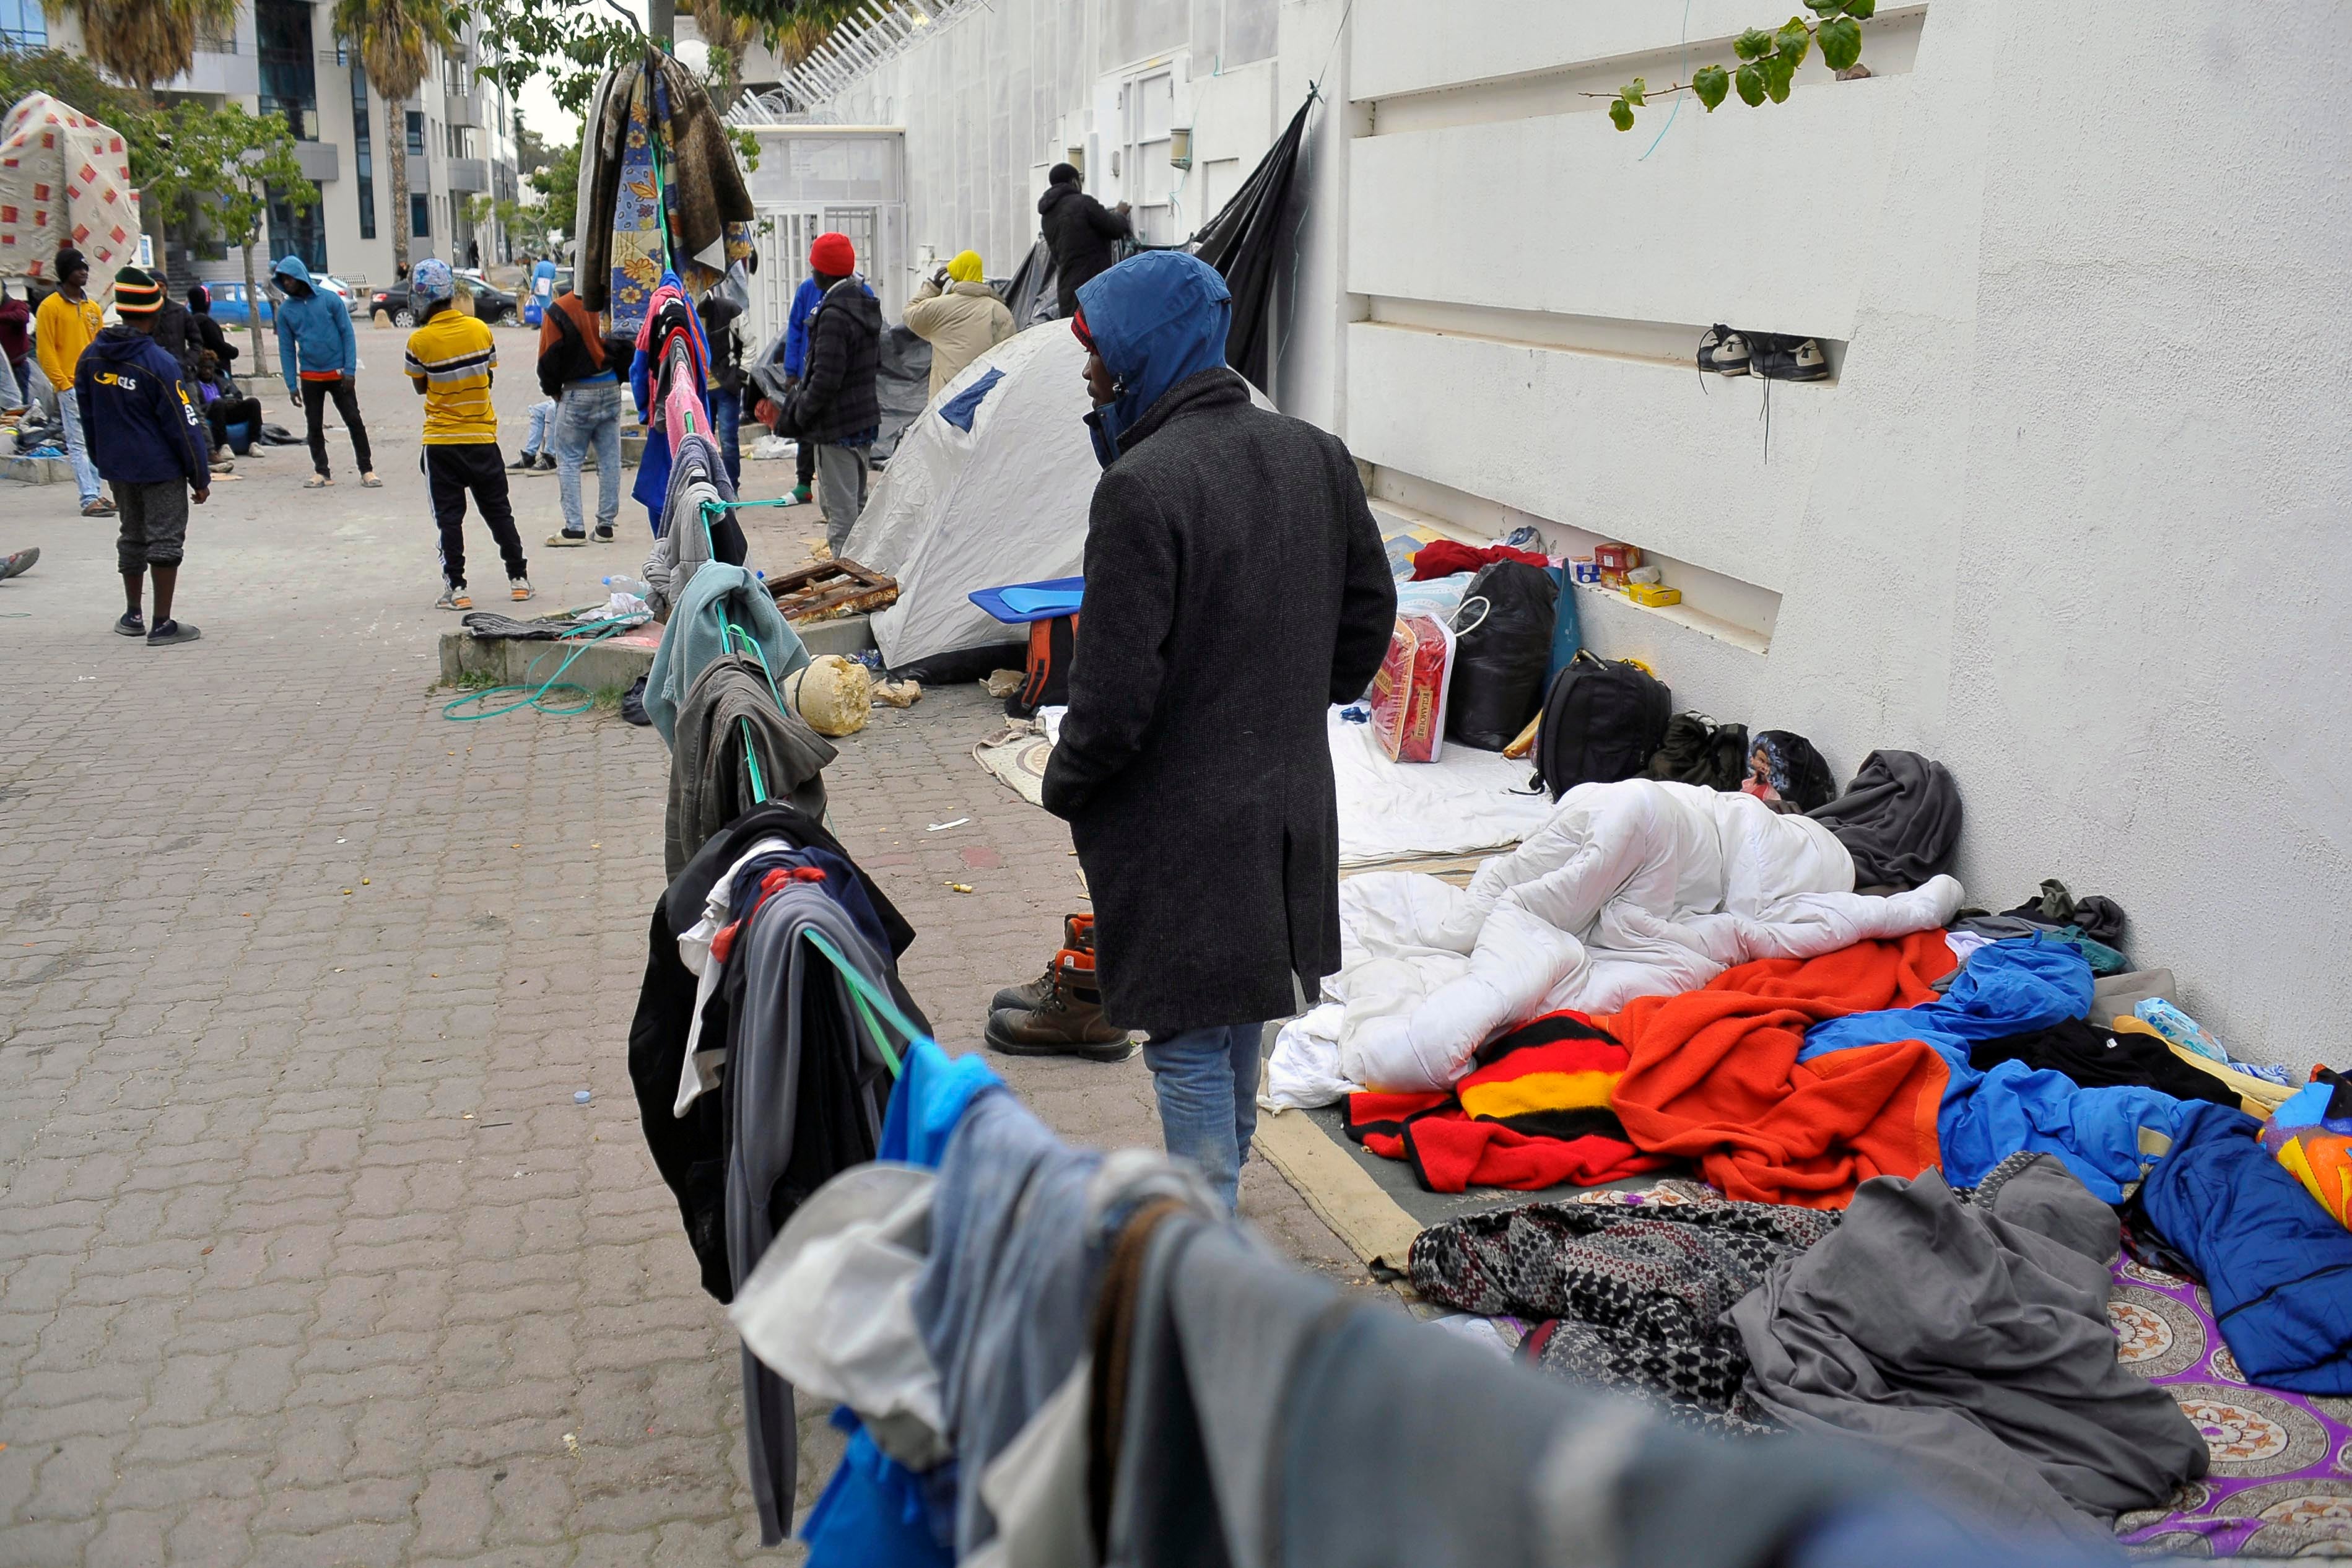 Black African migrants camp, in Tunis, Tunisia, seeking shelter and protection amidst attacks on them, March 2, 2023.